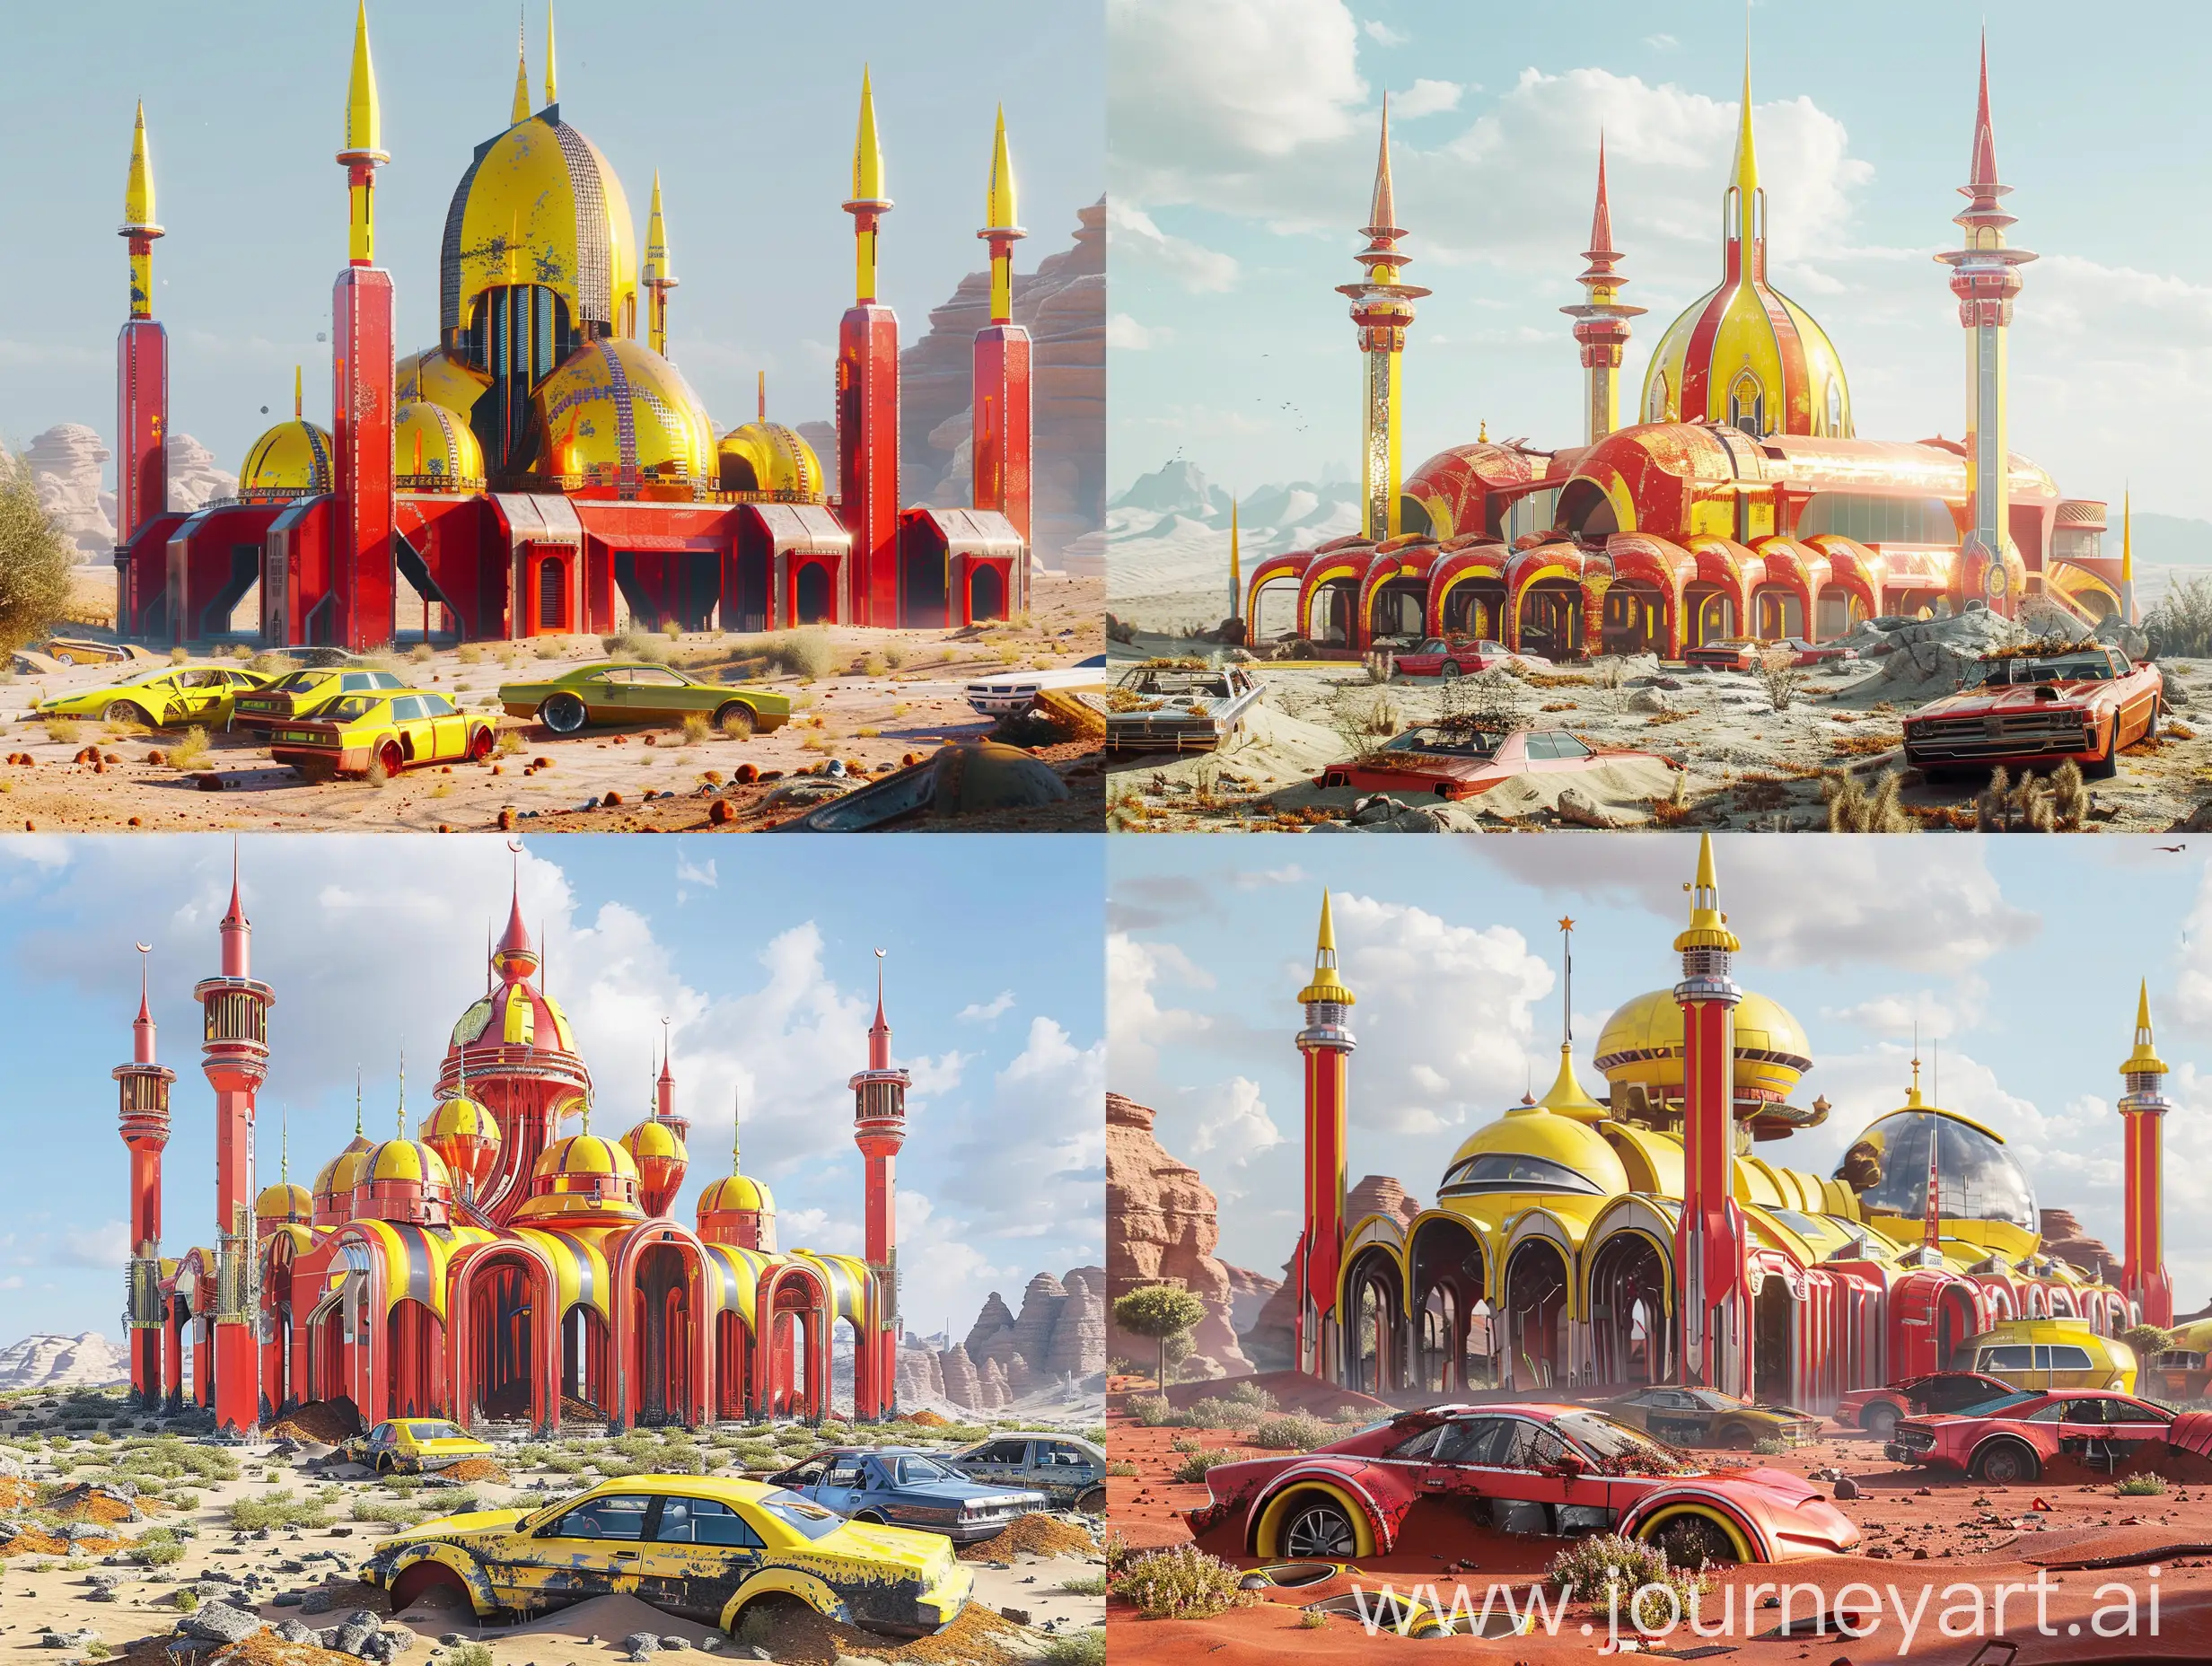 a shiny and clean mosque made of red yellow sleek sci-fi metal pieces, set in a desert landscape, partially buried futuristic cars hinting at abandonment, Marvel Cinematic Universe inspired aesthetics --ar 4:3